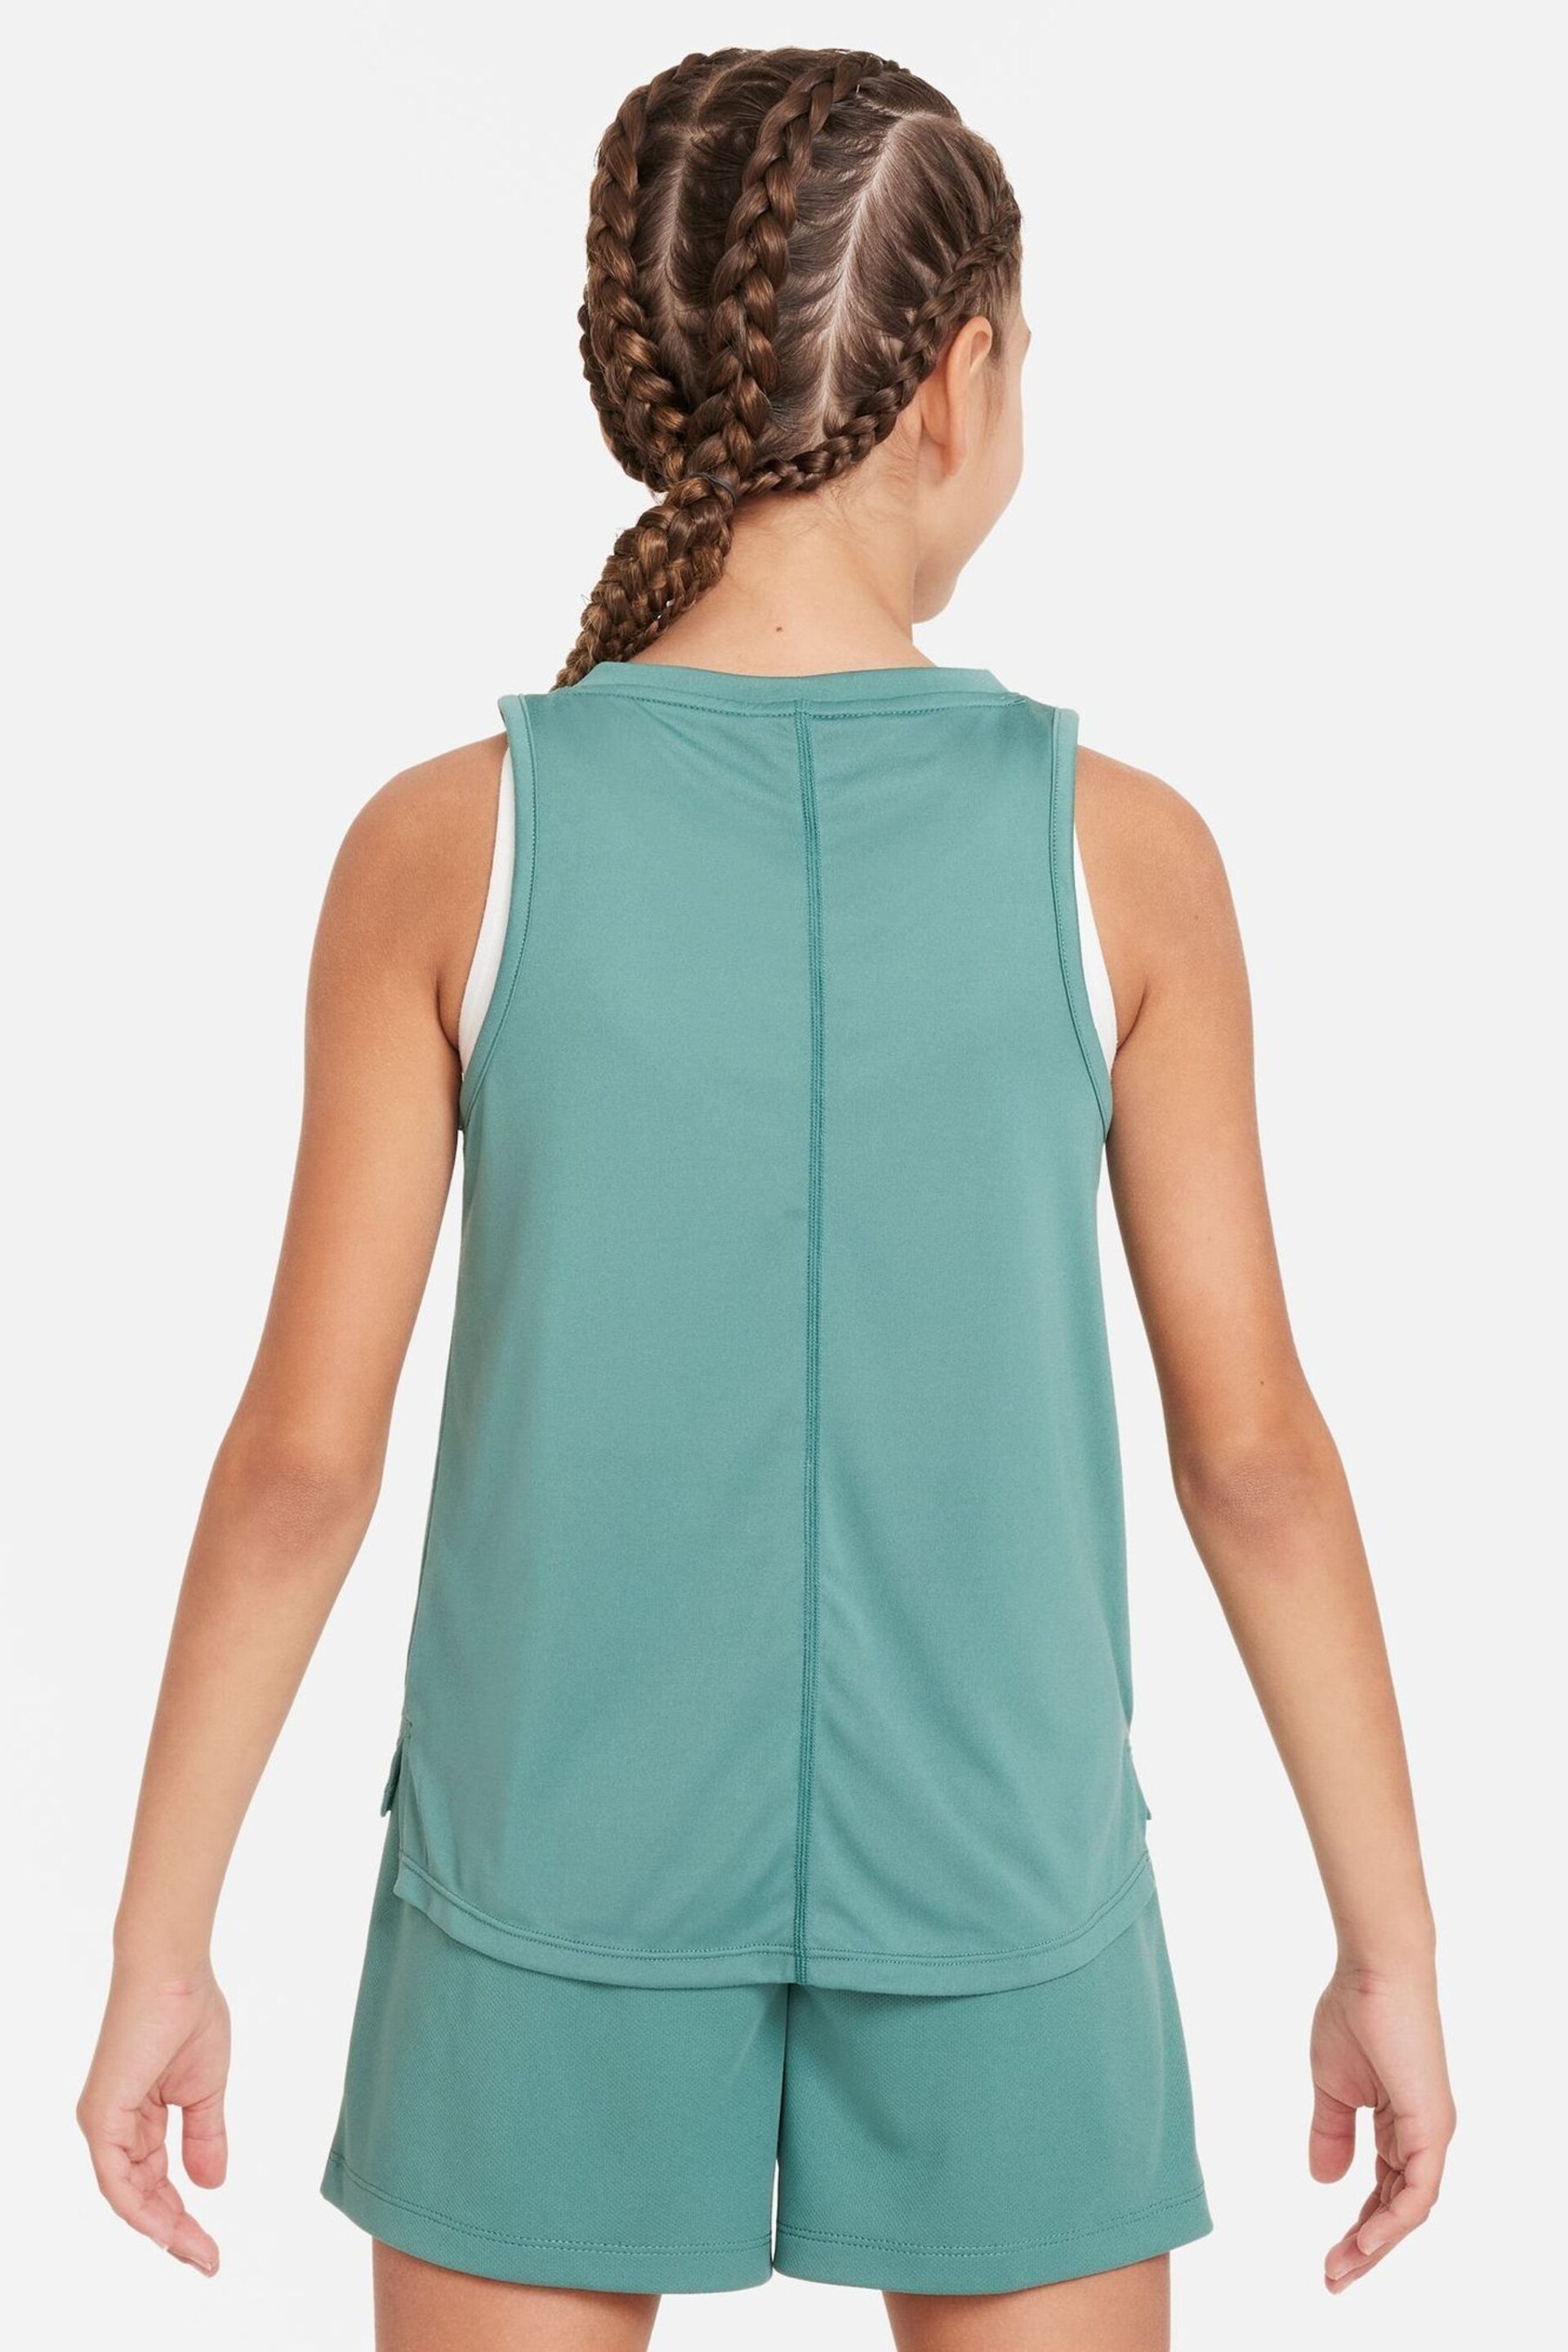 Nike Green Dri-FIT Performance One Vest Top - Image 2 of 5